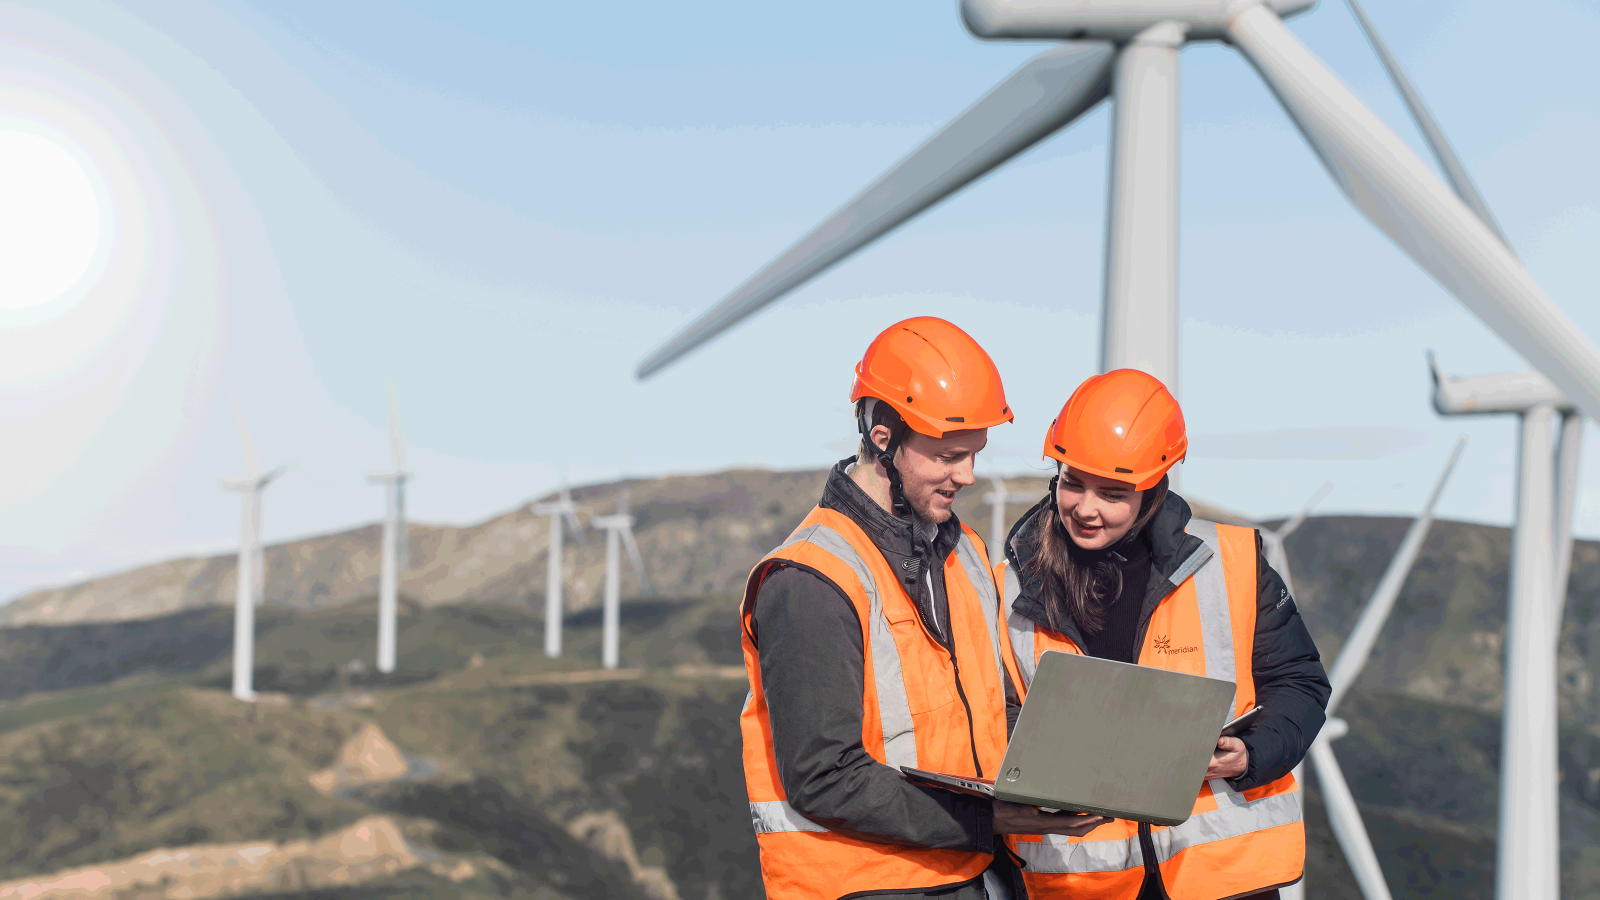 Two students wearing high visability orange vests and hard hats, stand outside on a hill with wind turbines in the background, and look at a laptop together.